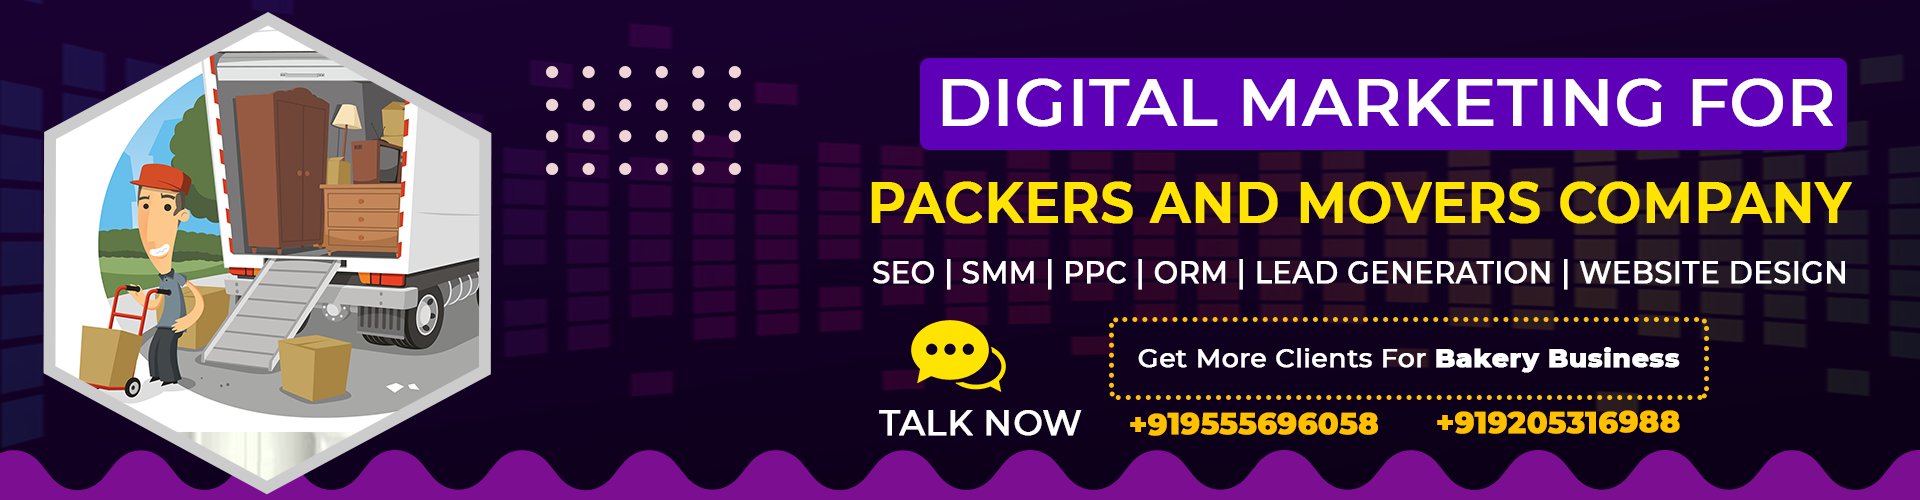 digital marketing for packers and movers